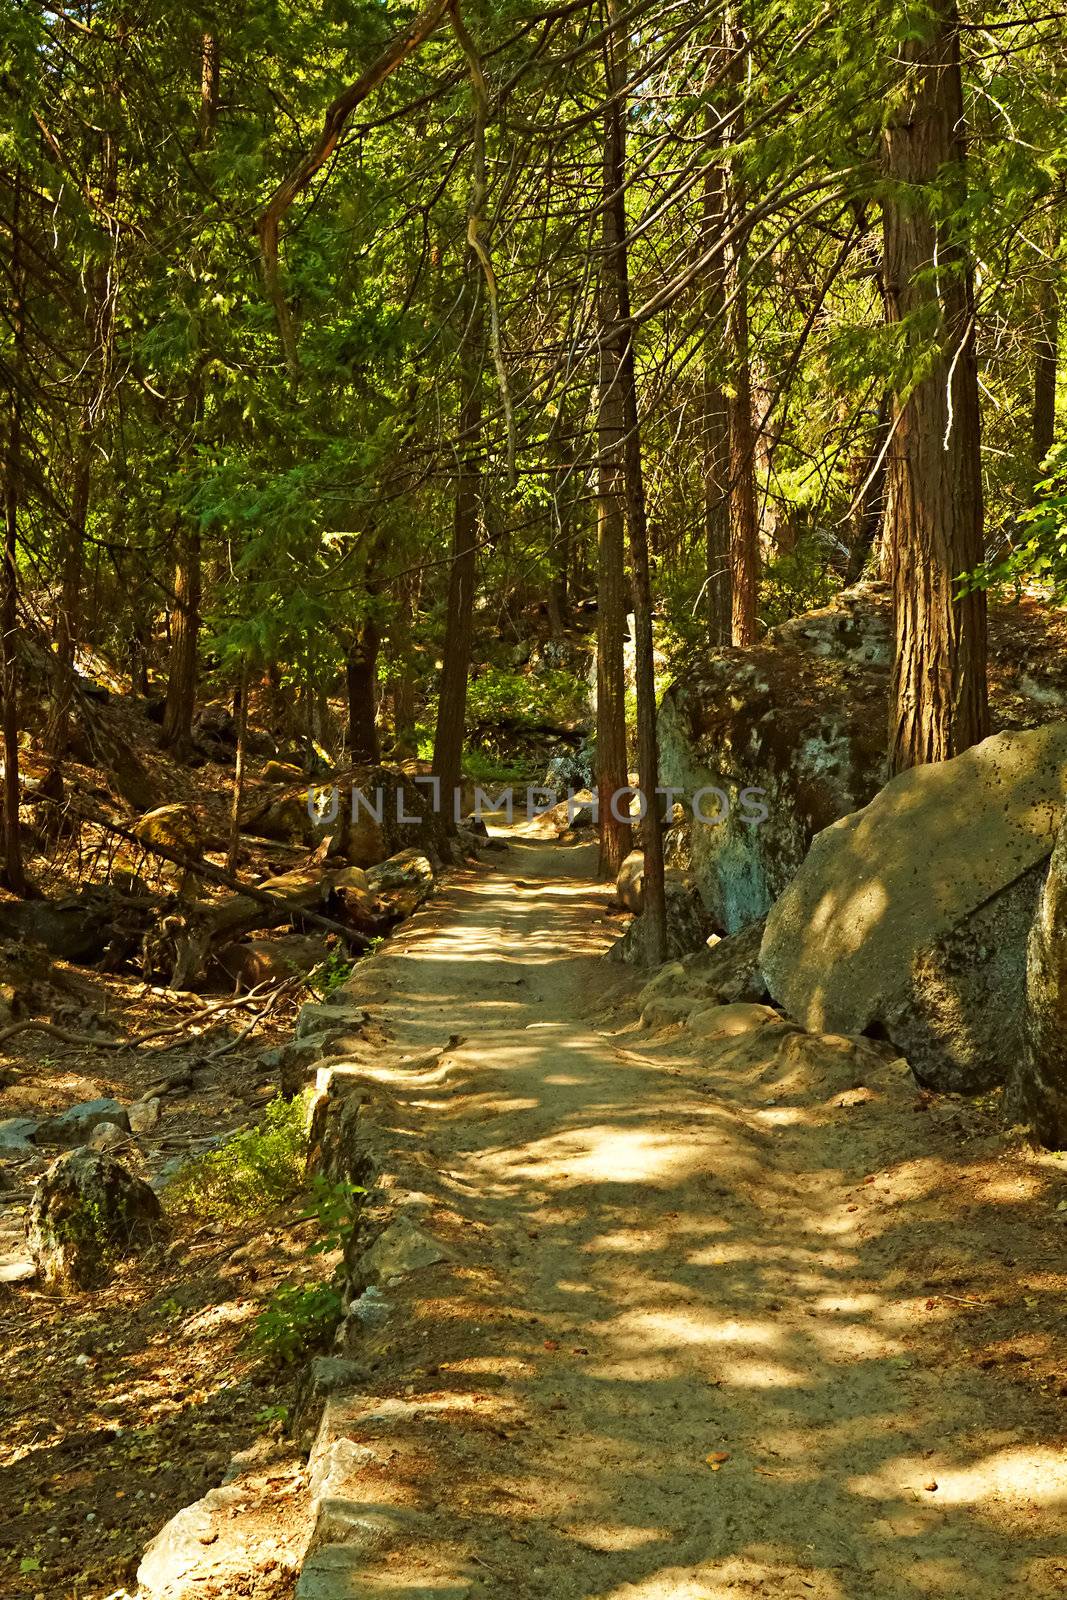 Forest Trail going through the Yosemite National Park, California, USA